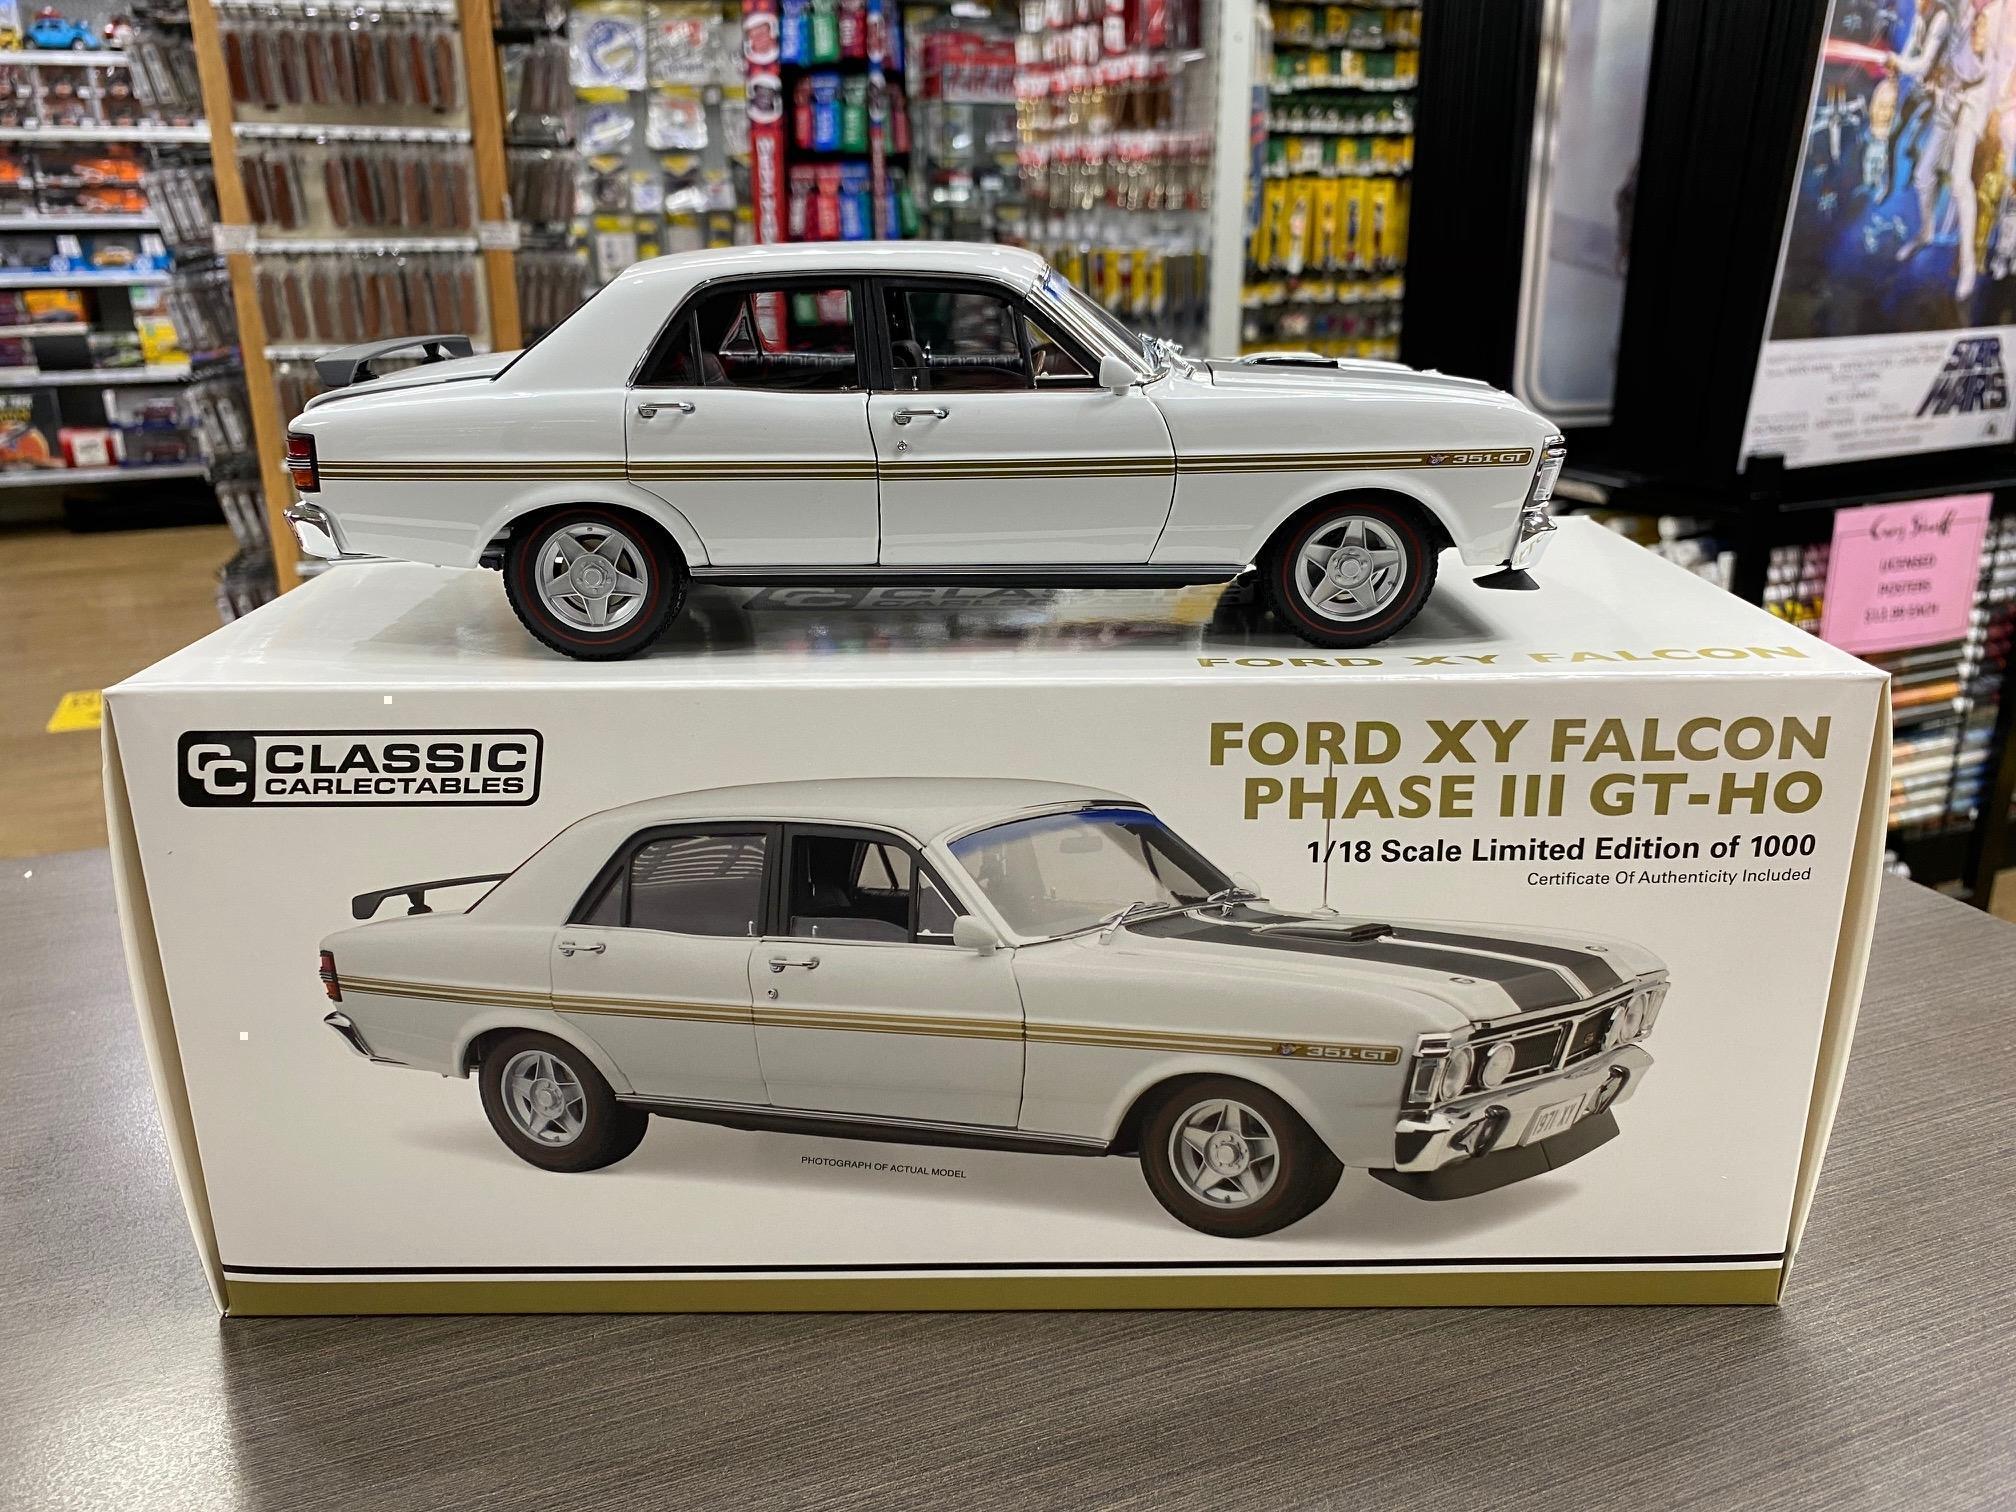 Ford XY Falcon Phase III GT-HO Ultra White